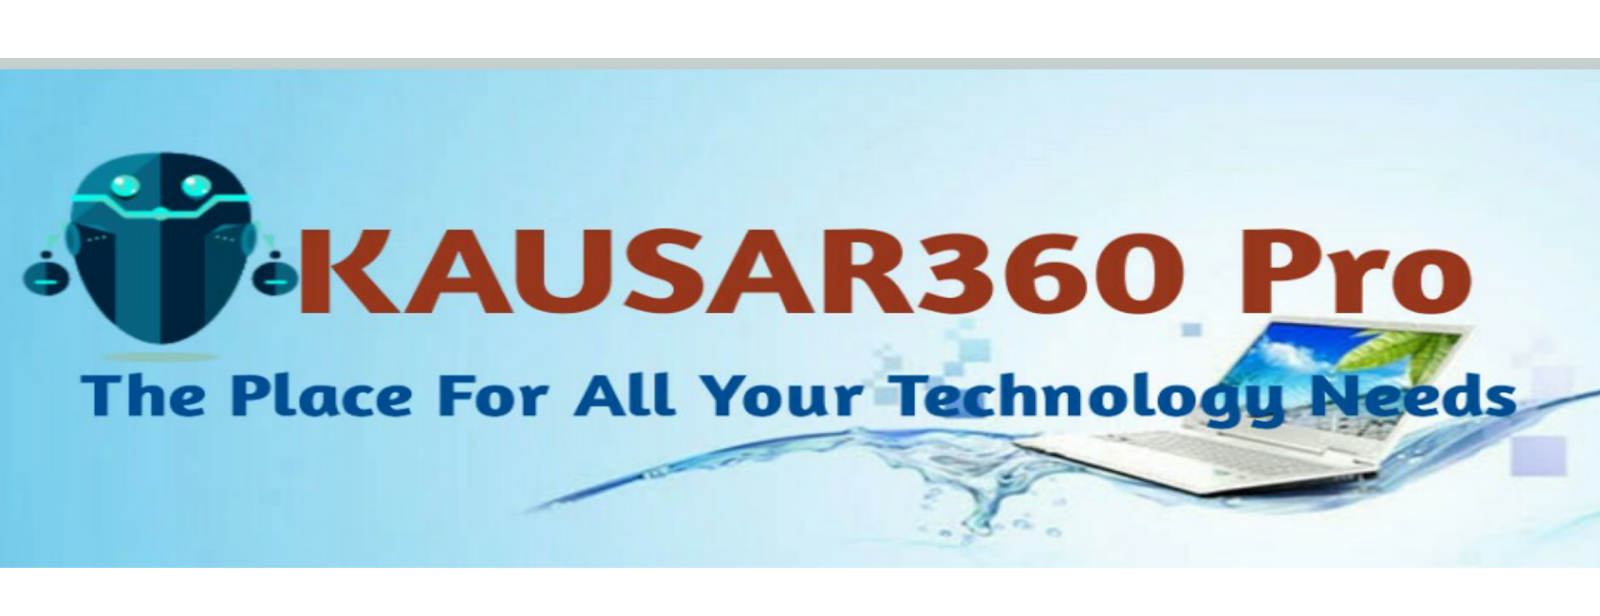 Kausar360 Pro | The Place For All Your Technology Needs